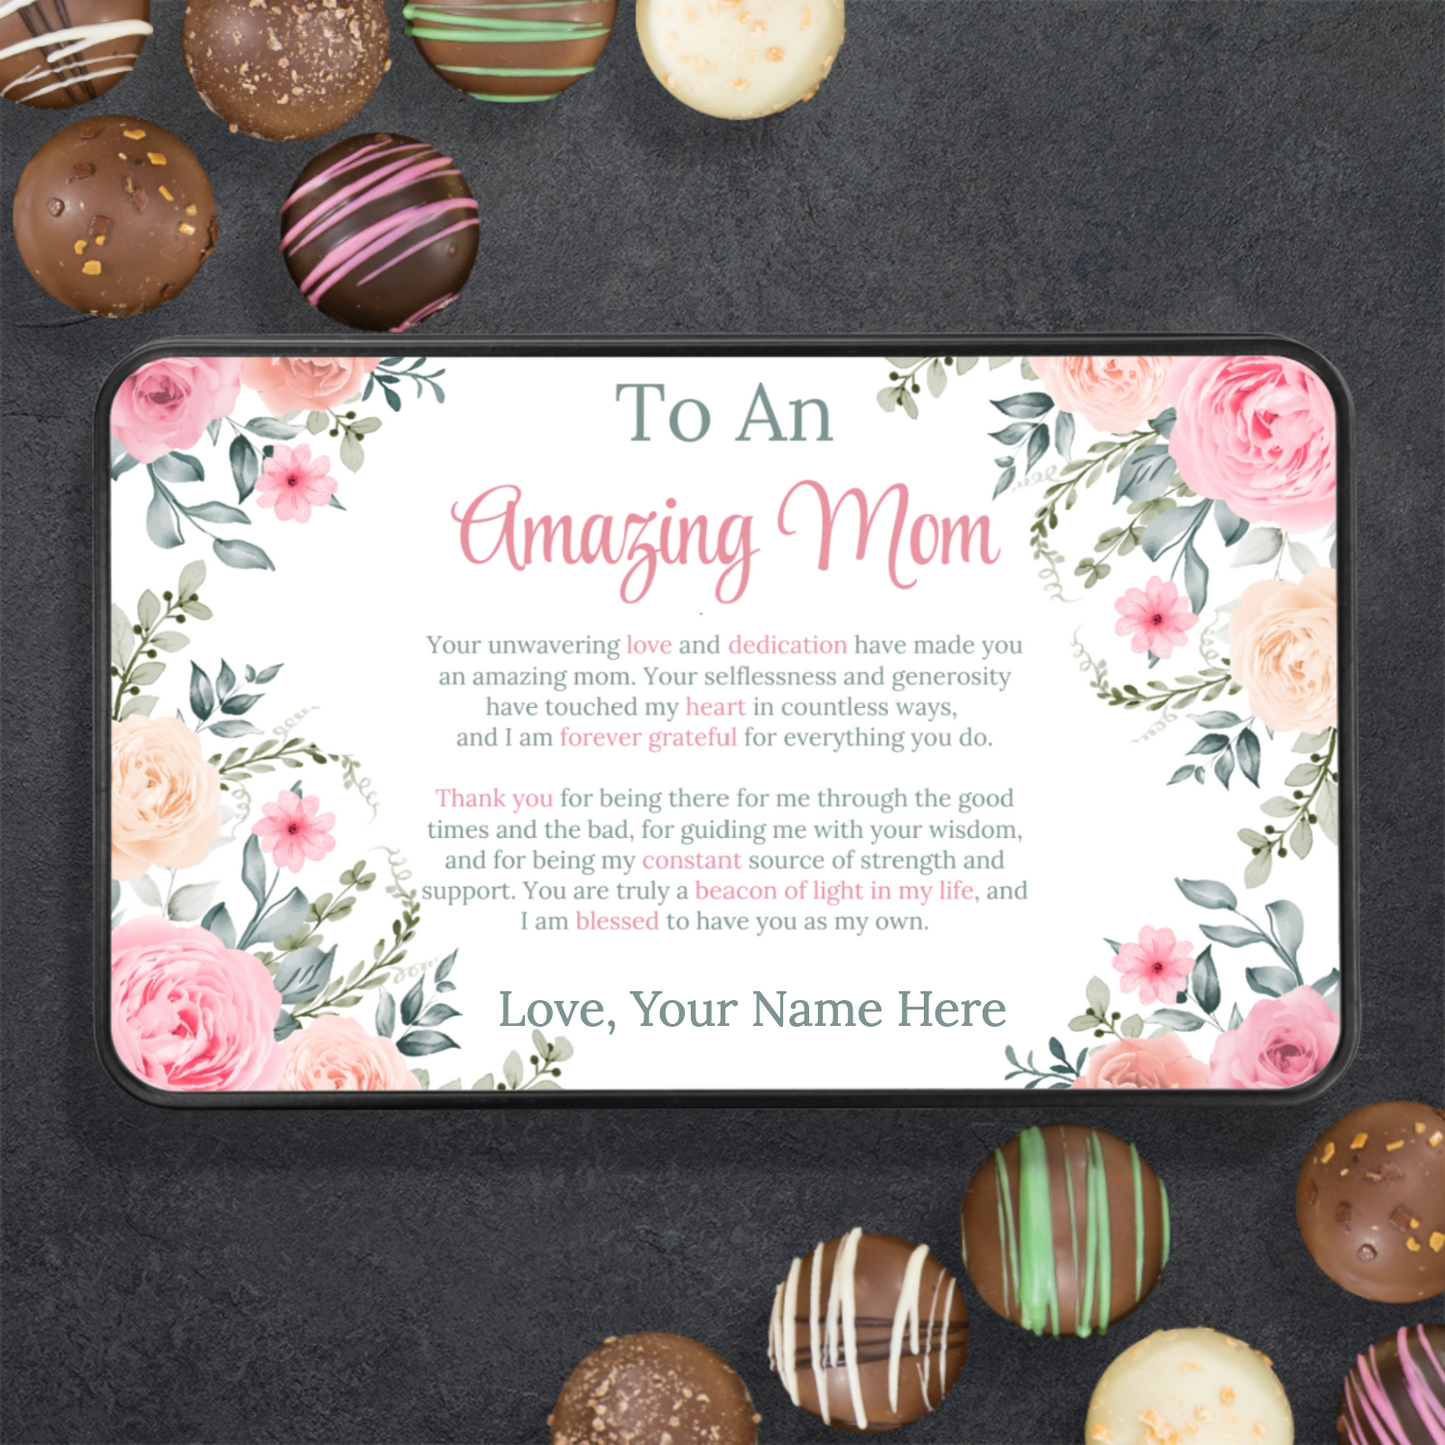 Personalized Luxury Chocolate Truffles in Keepsake Tin - Amazing Mom - Gift for Mom - Mothers Day Gift - Birthday Gift for Mom